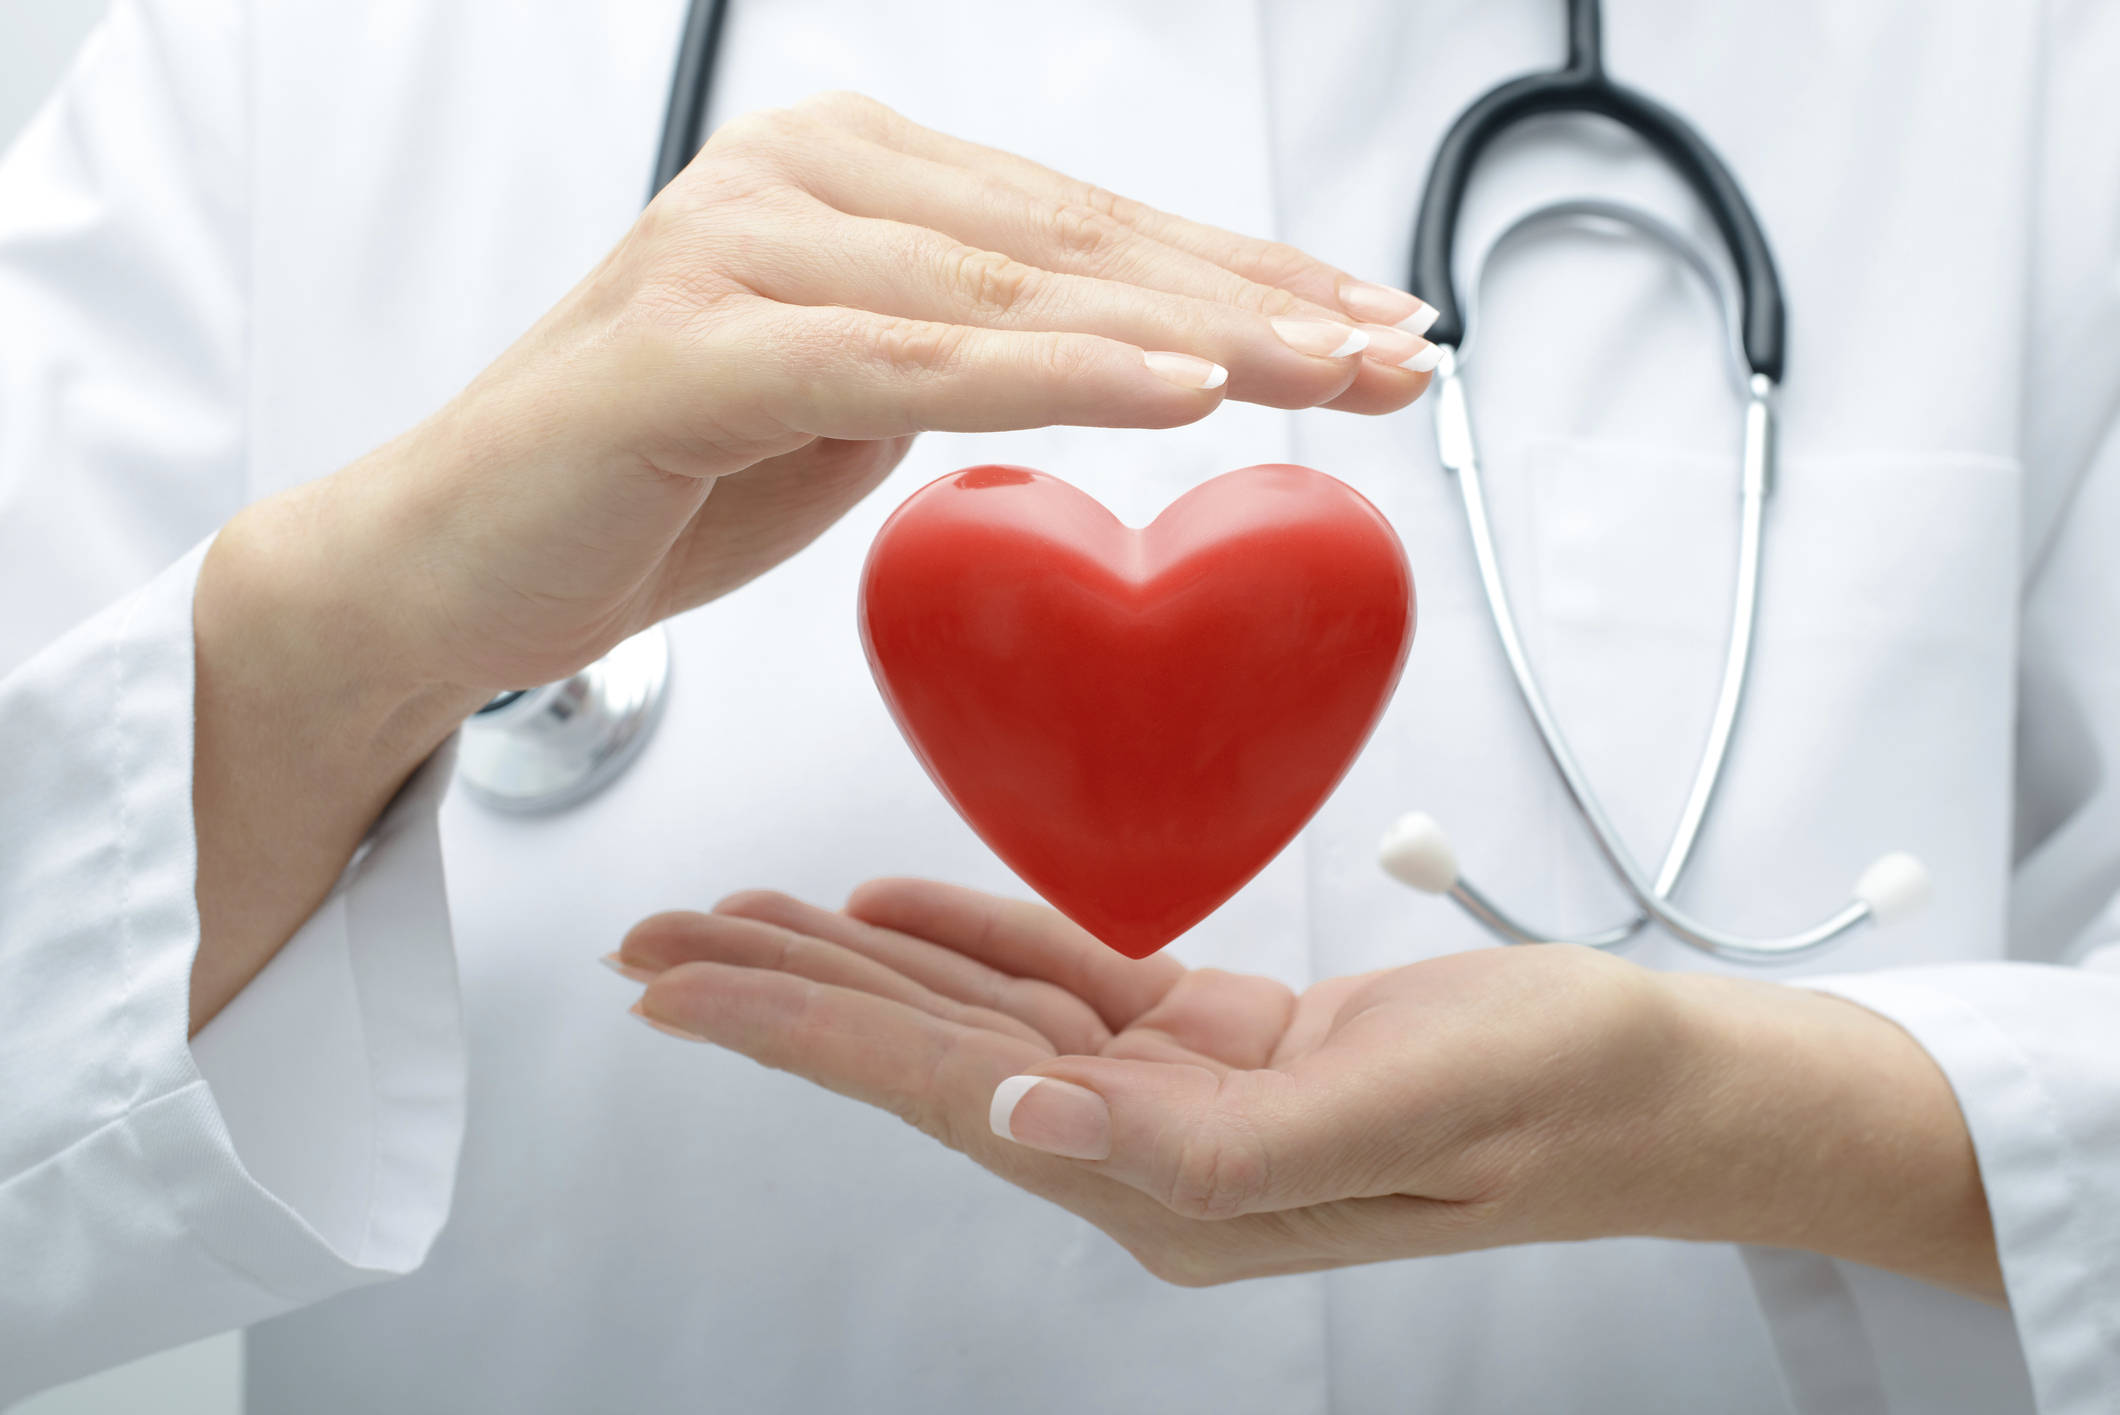 8 Proven Ways to Strengthen Your Heart Health